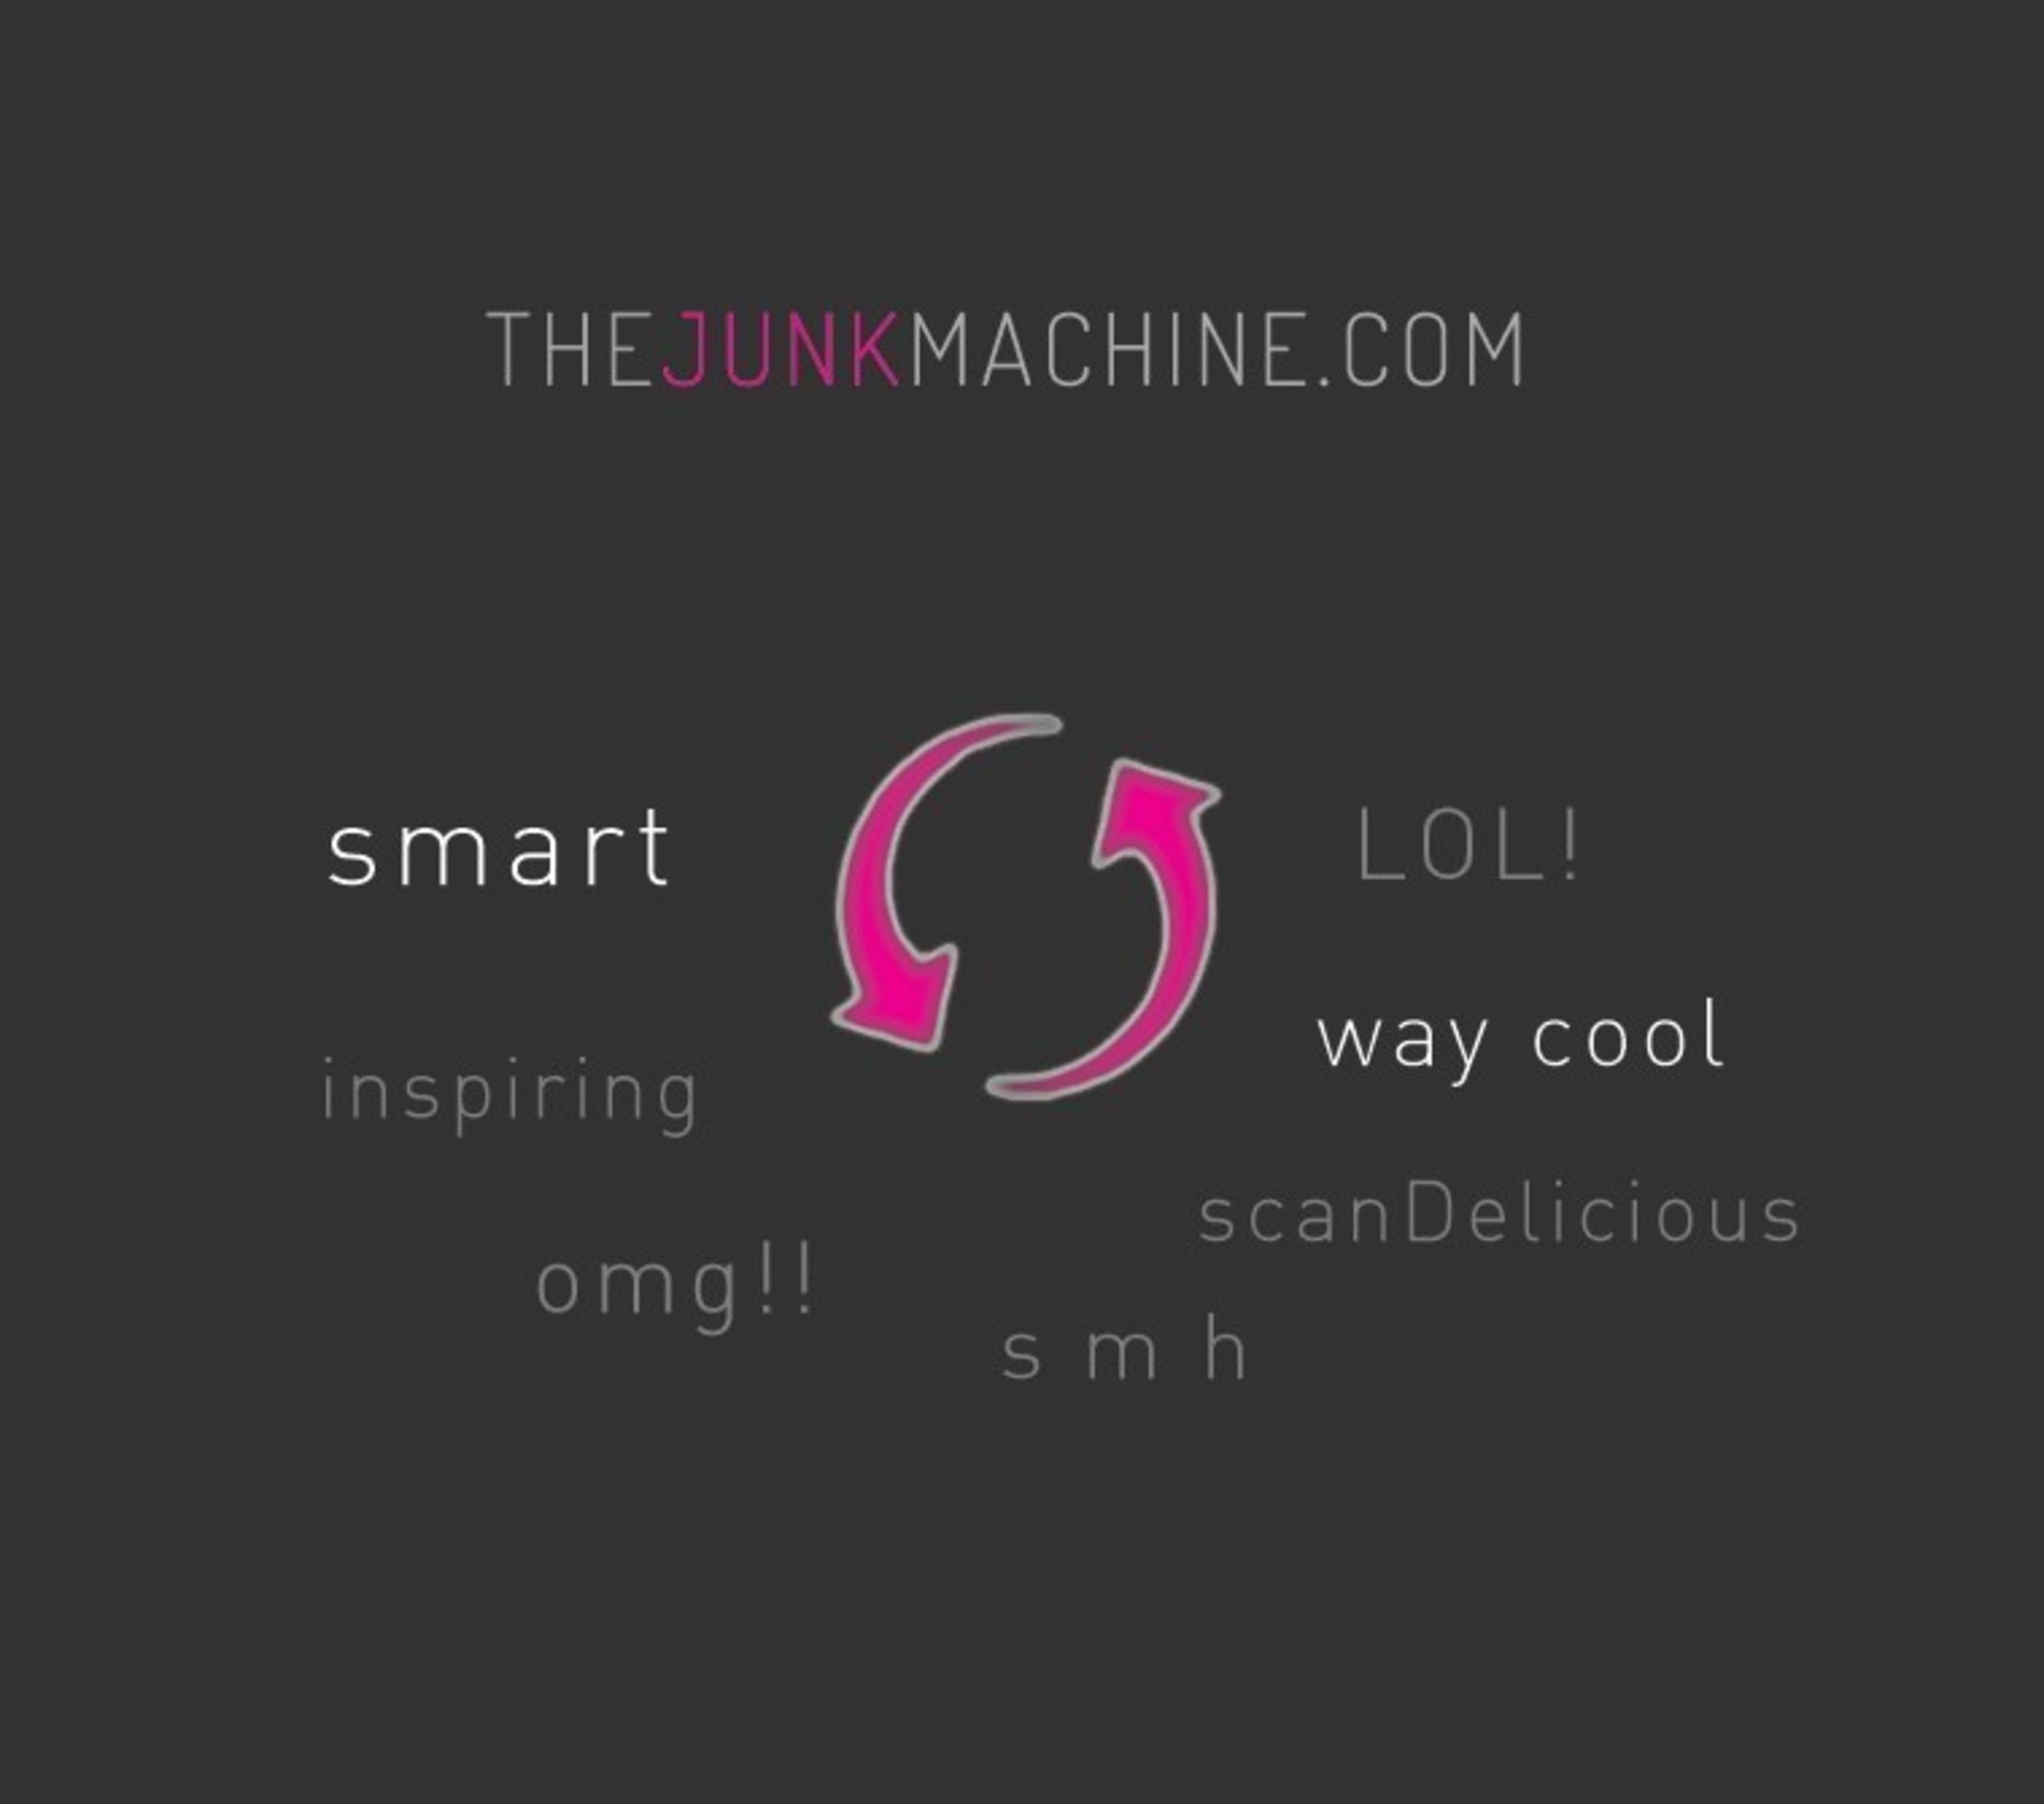 Instead of “like” and “dislike”, The Junk Machine gives the reader a choice of eight webby reactions:  lol!, omg, smh,  way cool, inspiring, smart, stoopid, and scanDelicious. (PRNewsFoto/The Junk Machine)